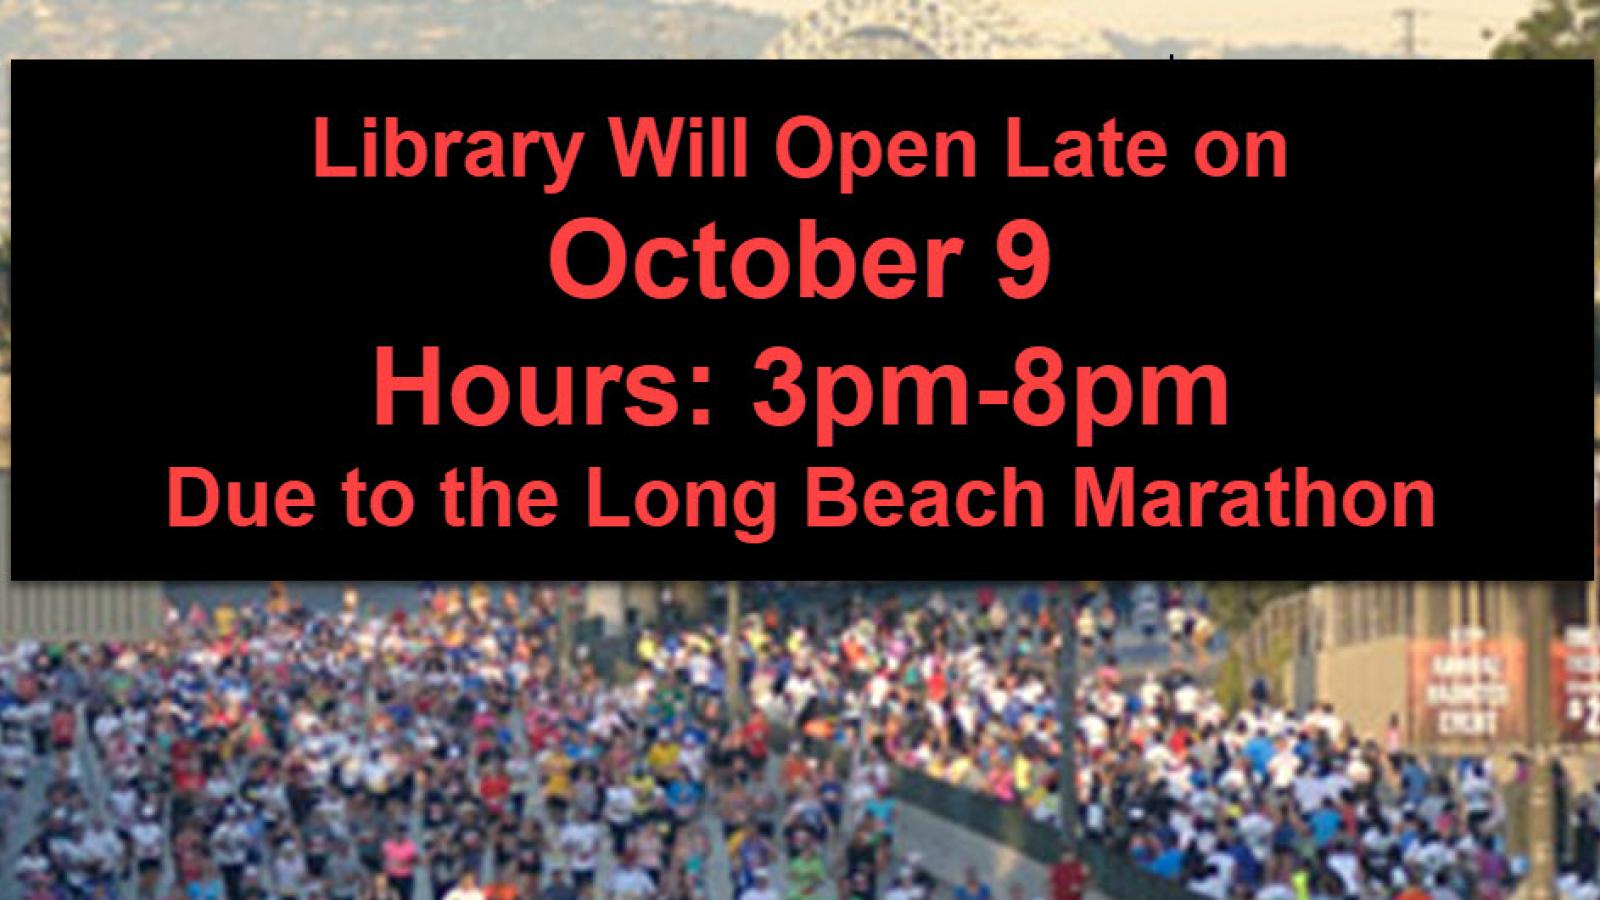 Library will open late on October 9, Hours:3pm-8pm due to the Long Beach Marathon